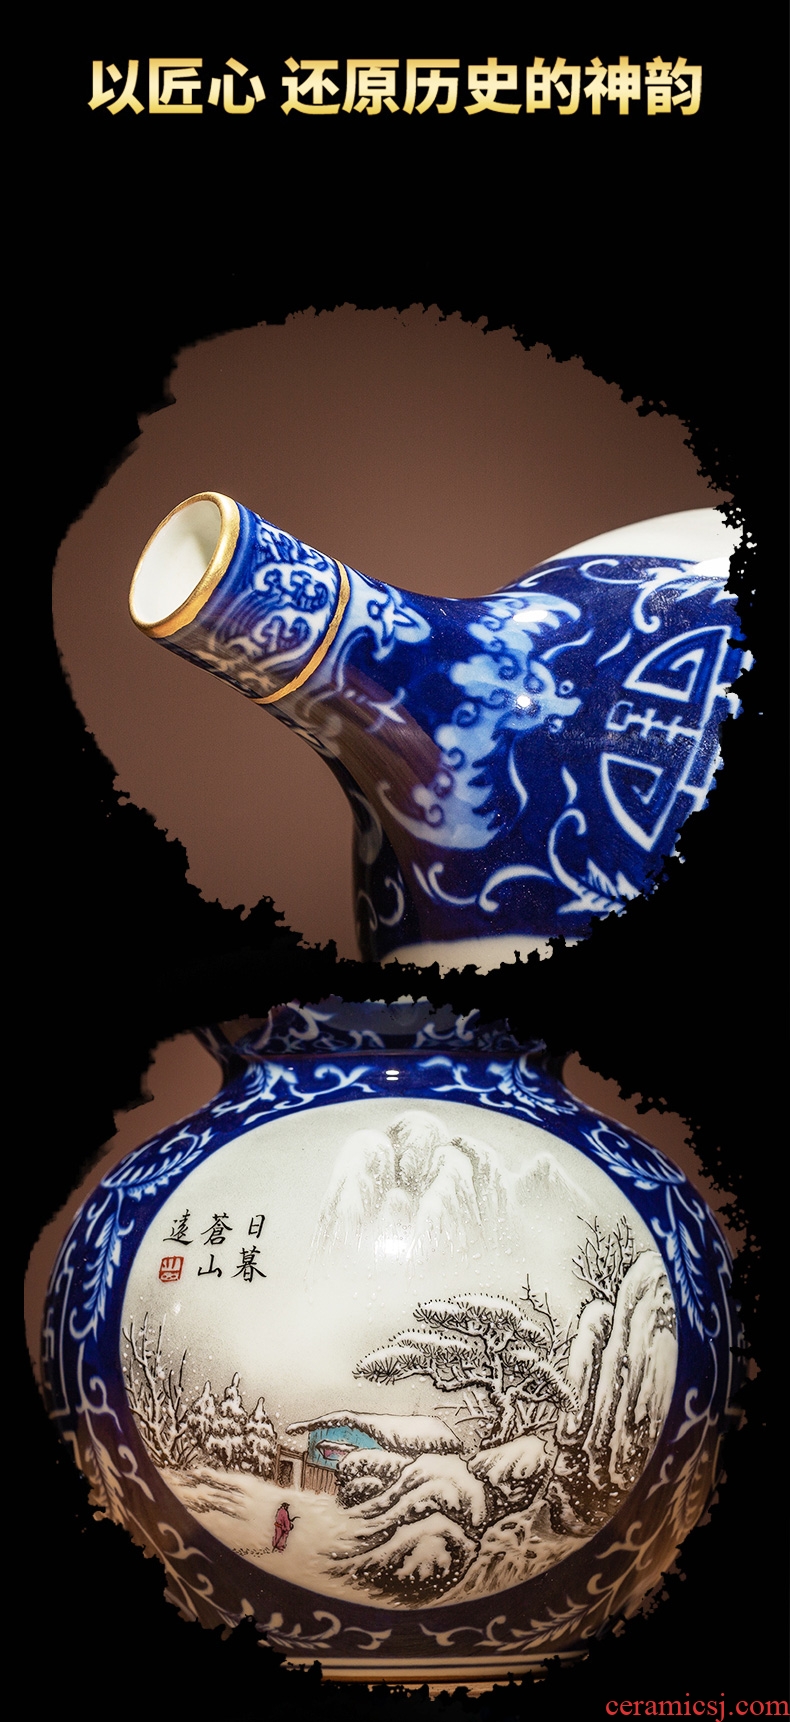 Better sealed kiln jingdezhen Chinese blue and white porcelain vase bottles of archaize of furnishing articles rich ancient frame gourd color ink to restore ancient ways small mouth